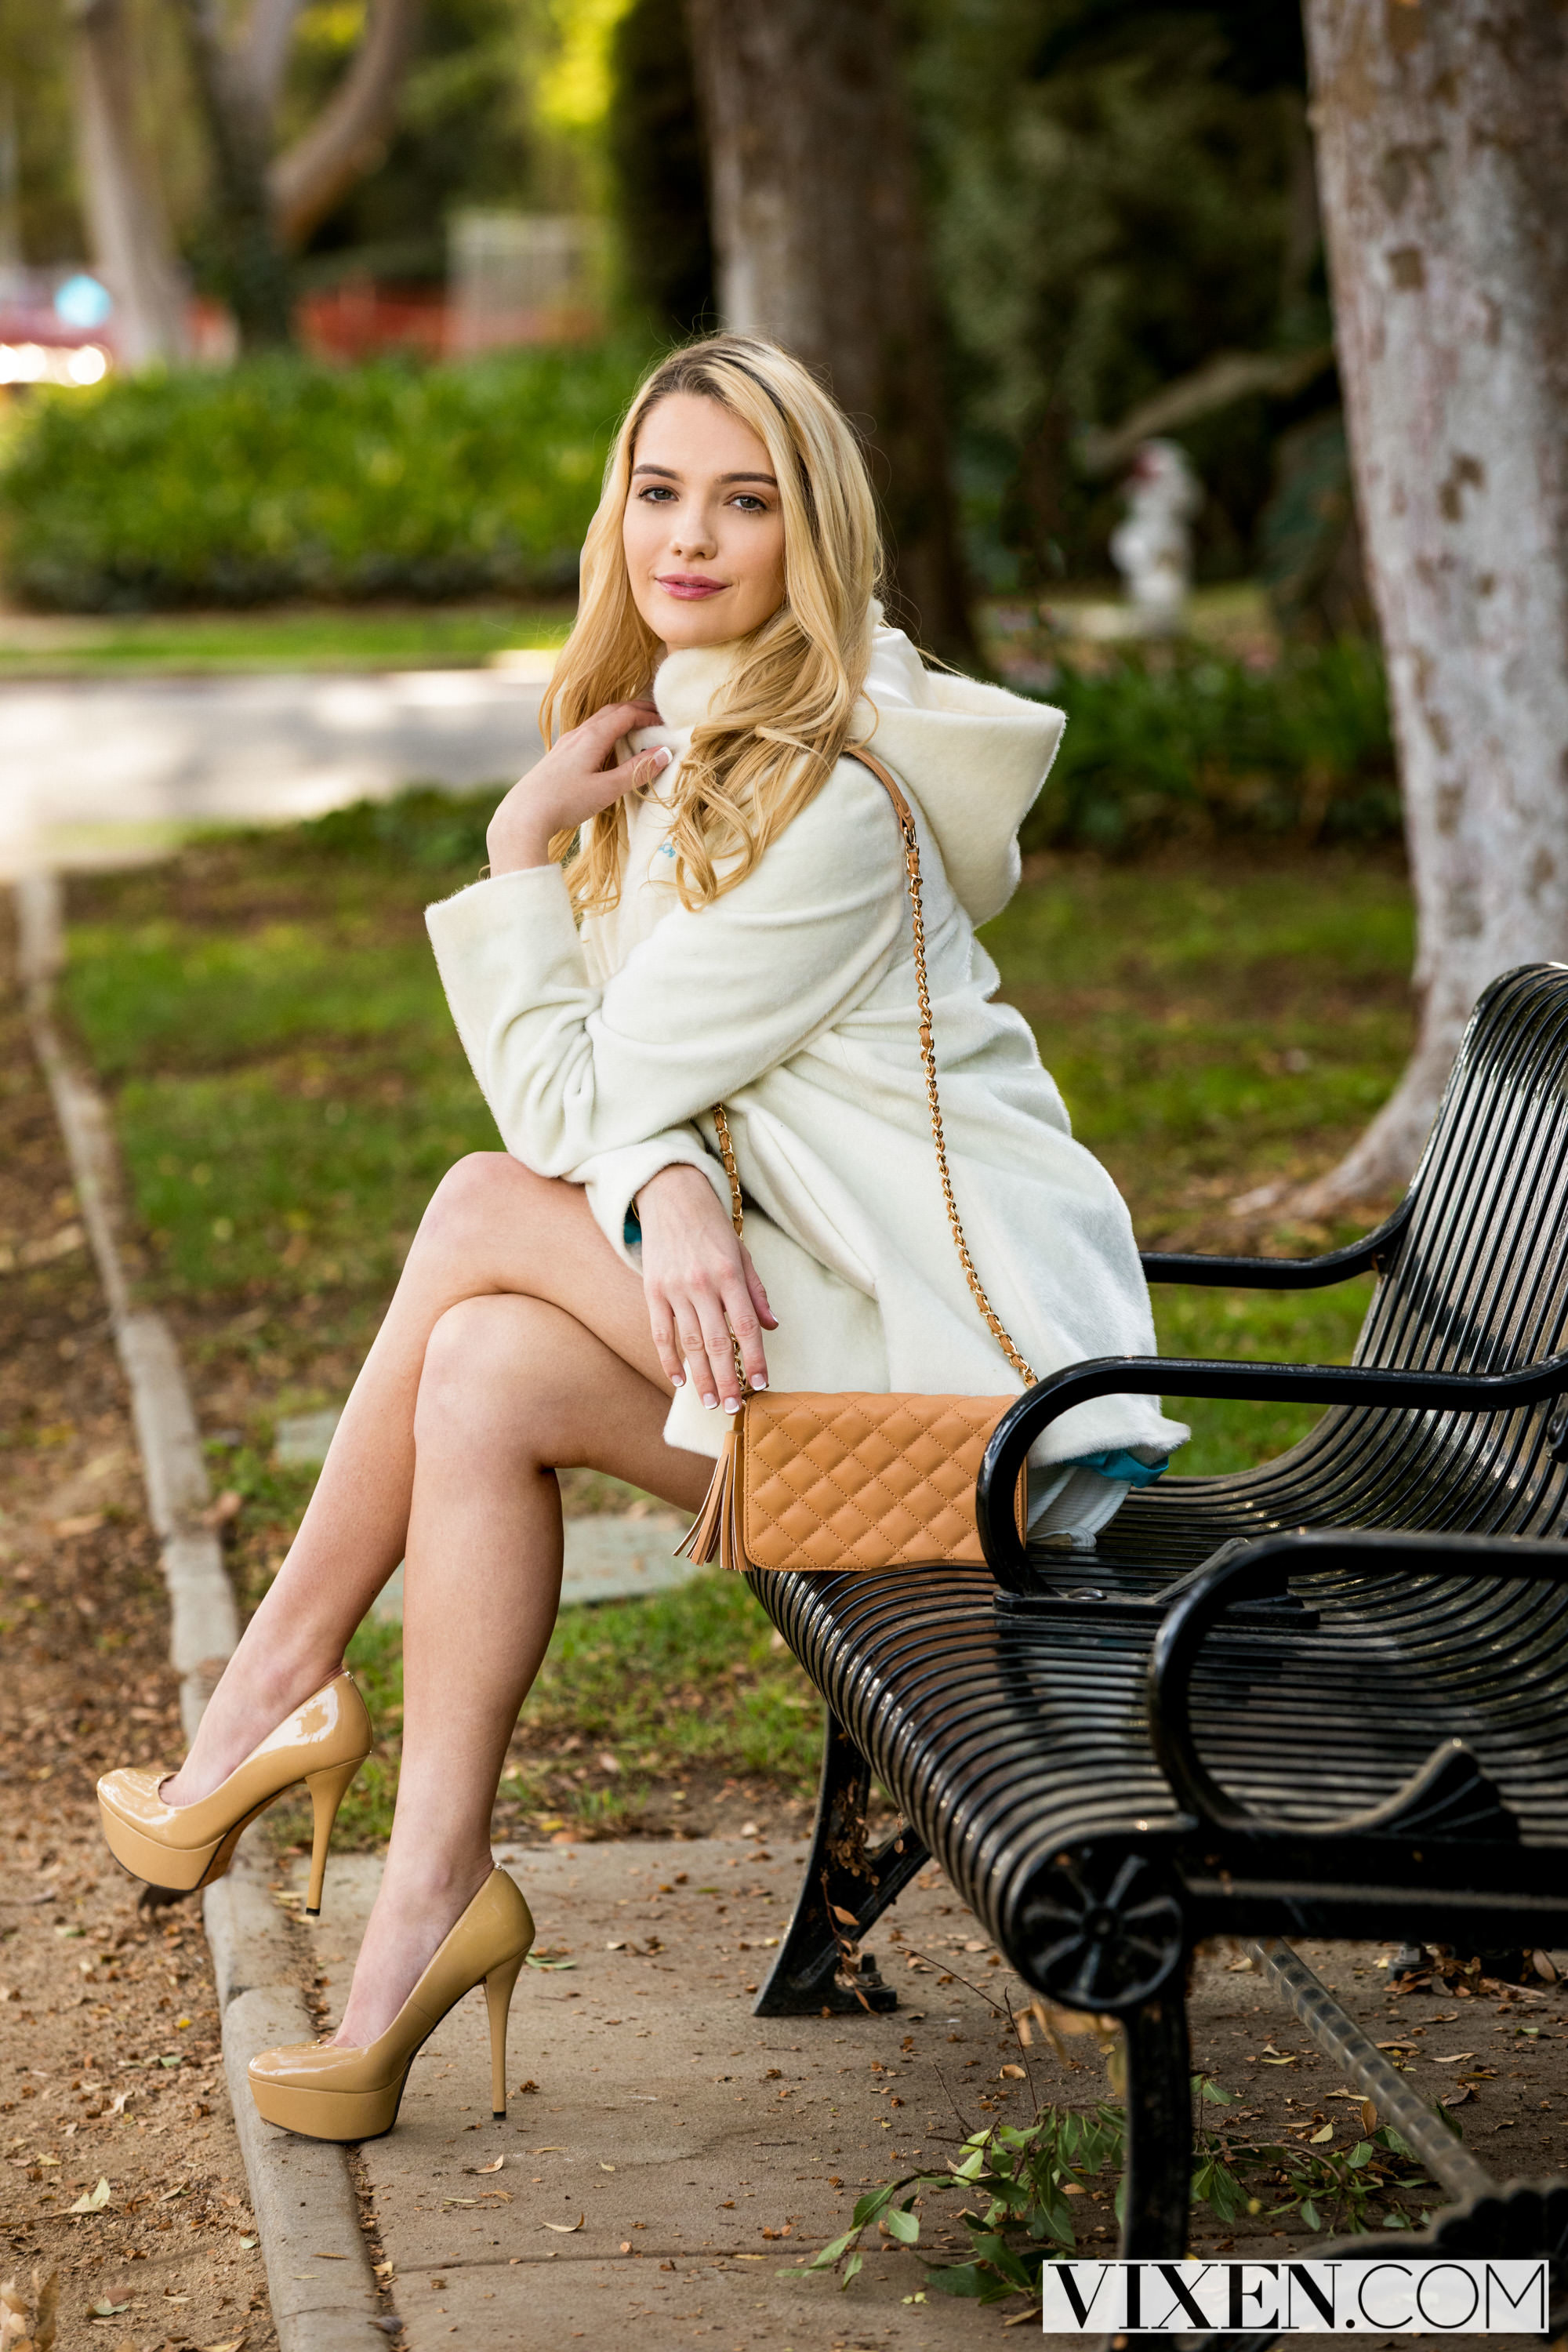 People 2000x3000 model looking at viewer Kenna James white coat legs crossed bench on bench Vixen pornstar portrait display women watermarked outdoors women outdoors looking over shoulder trees wavy hair high heels purse parted lips blonde pointed toes depth of field leaves